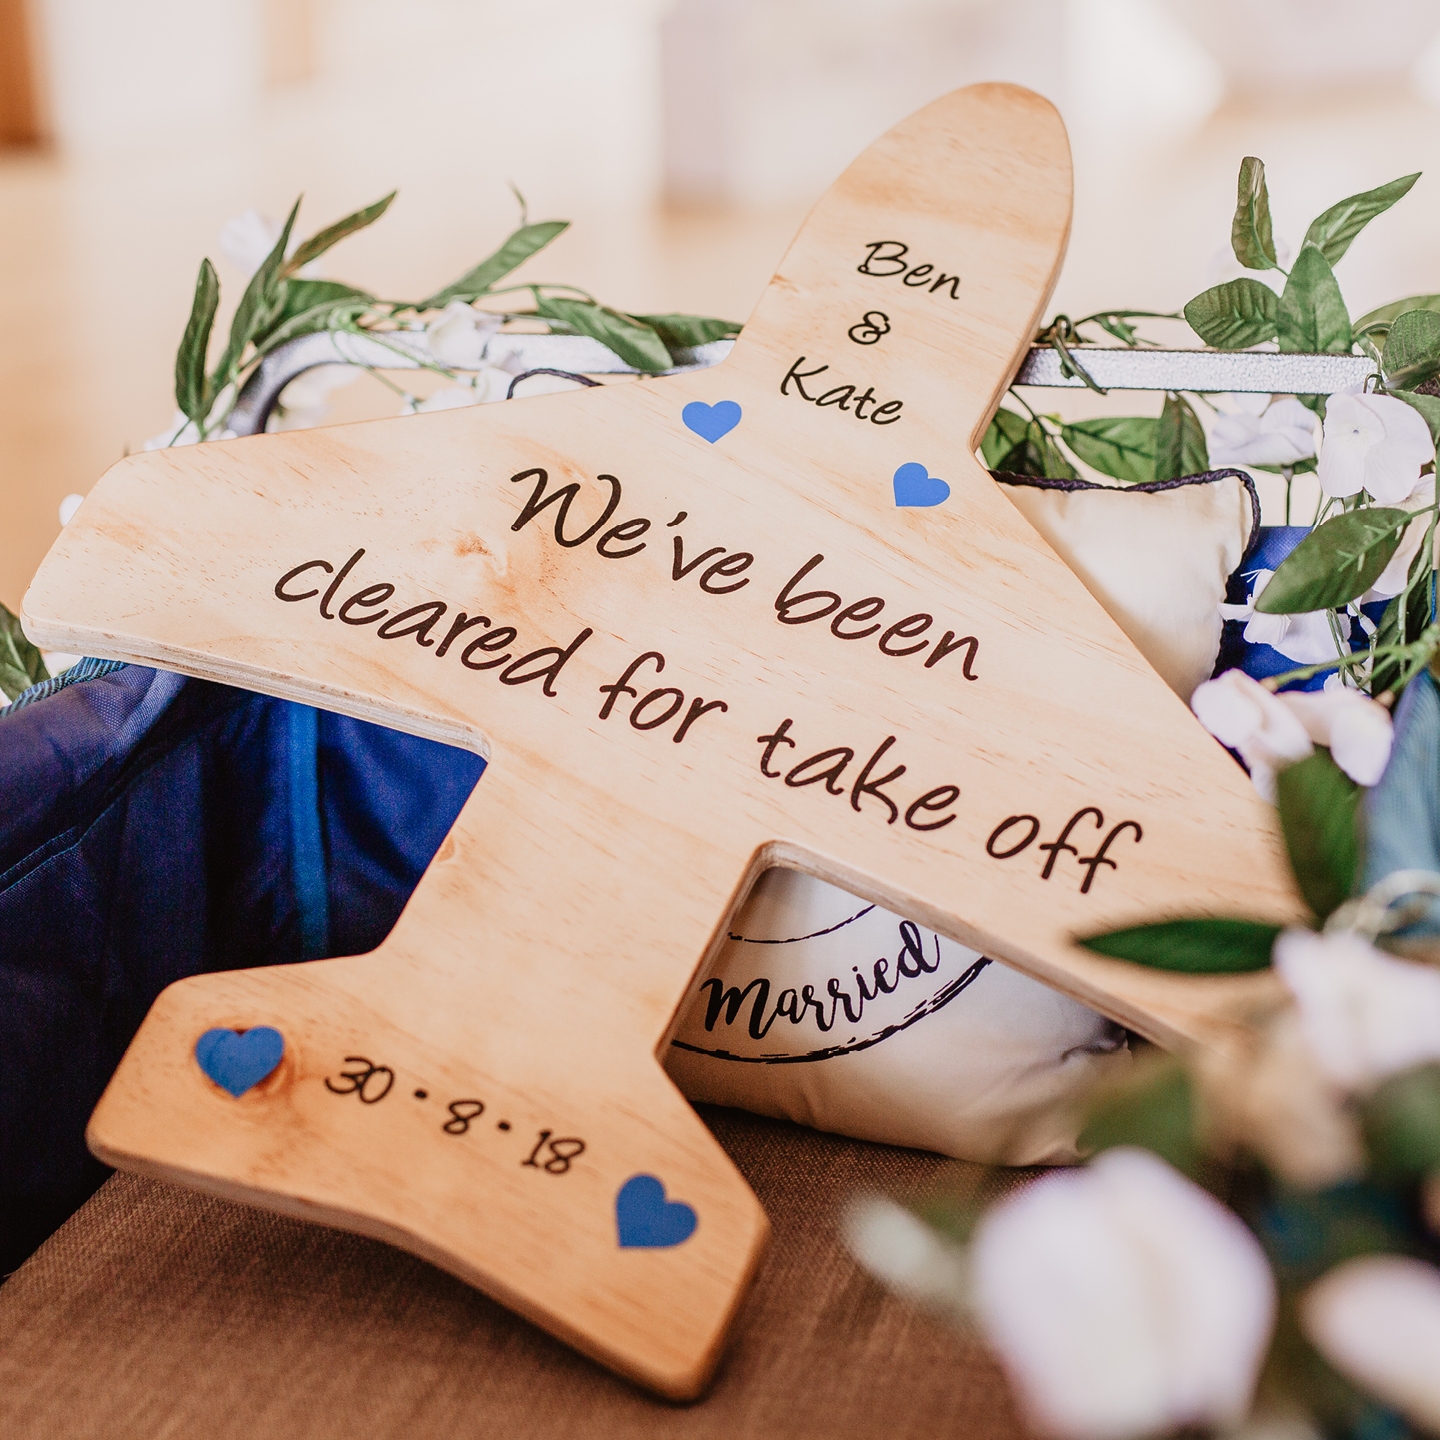 Page boy and flower girl ideas, travel themed wedding, cleared for take off sign